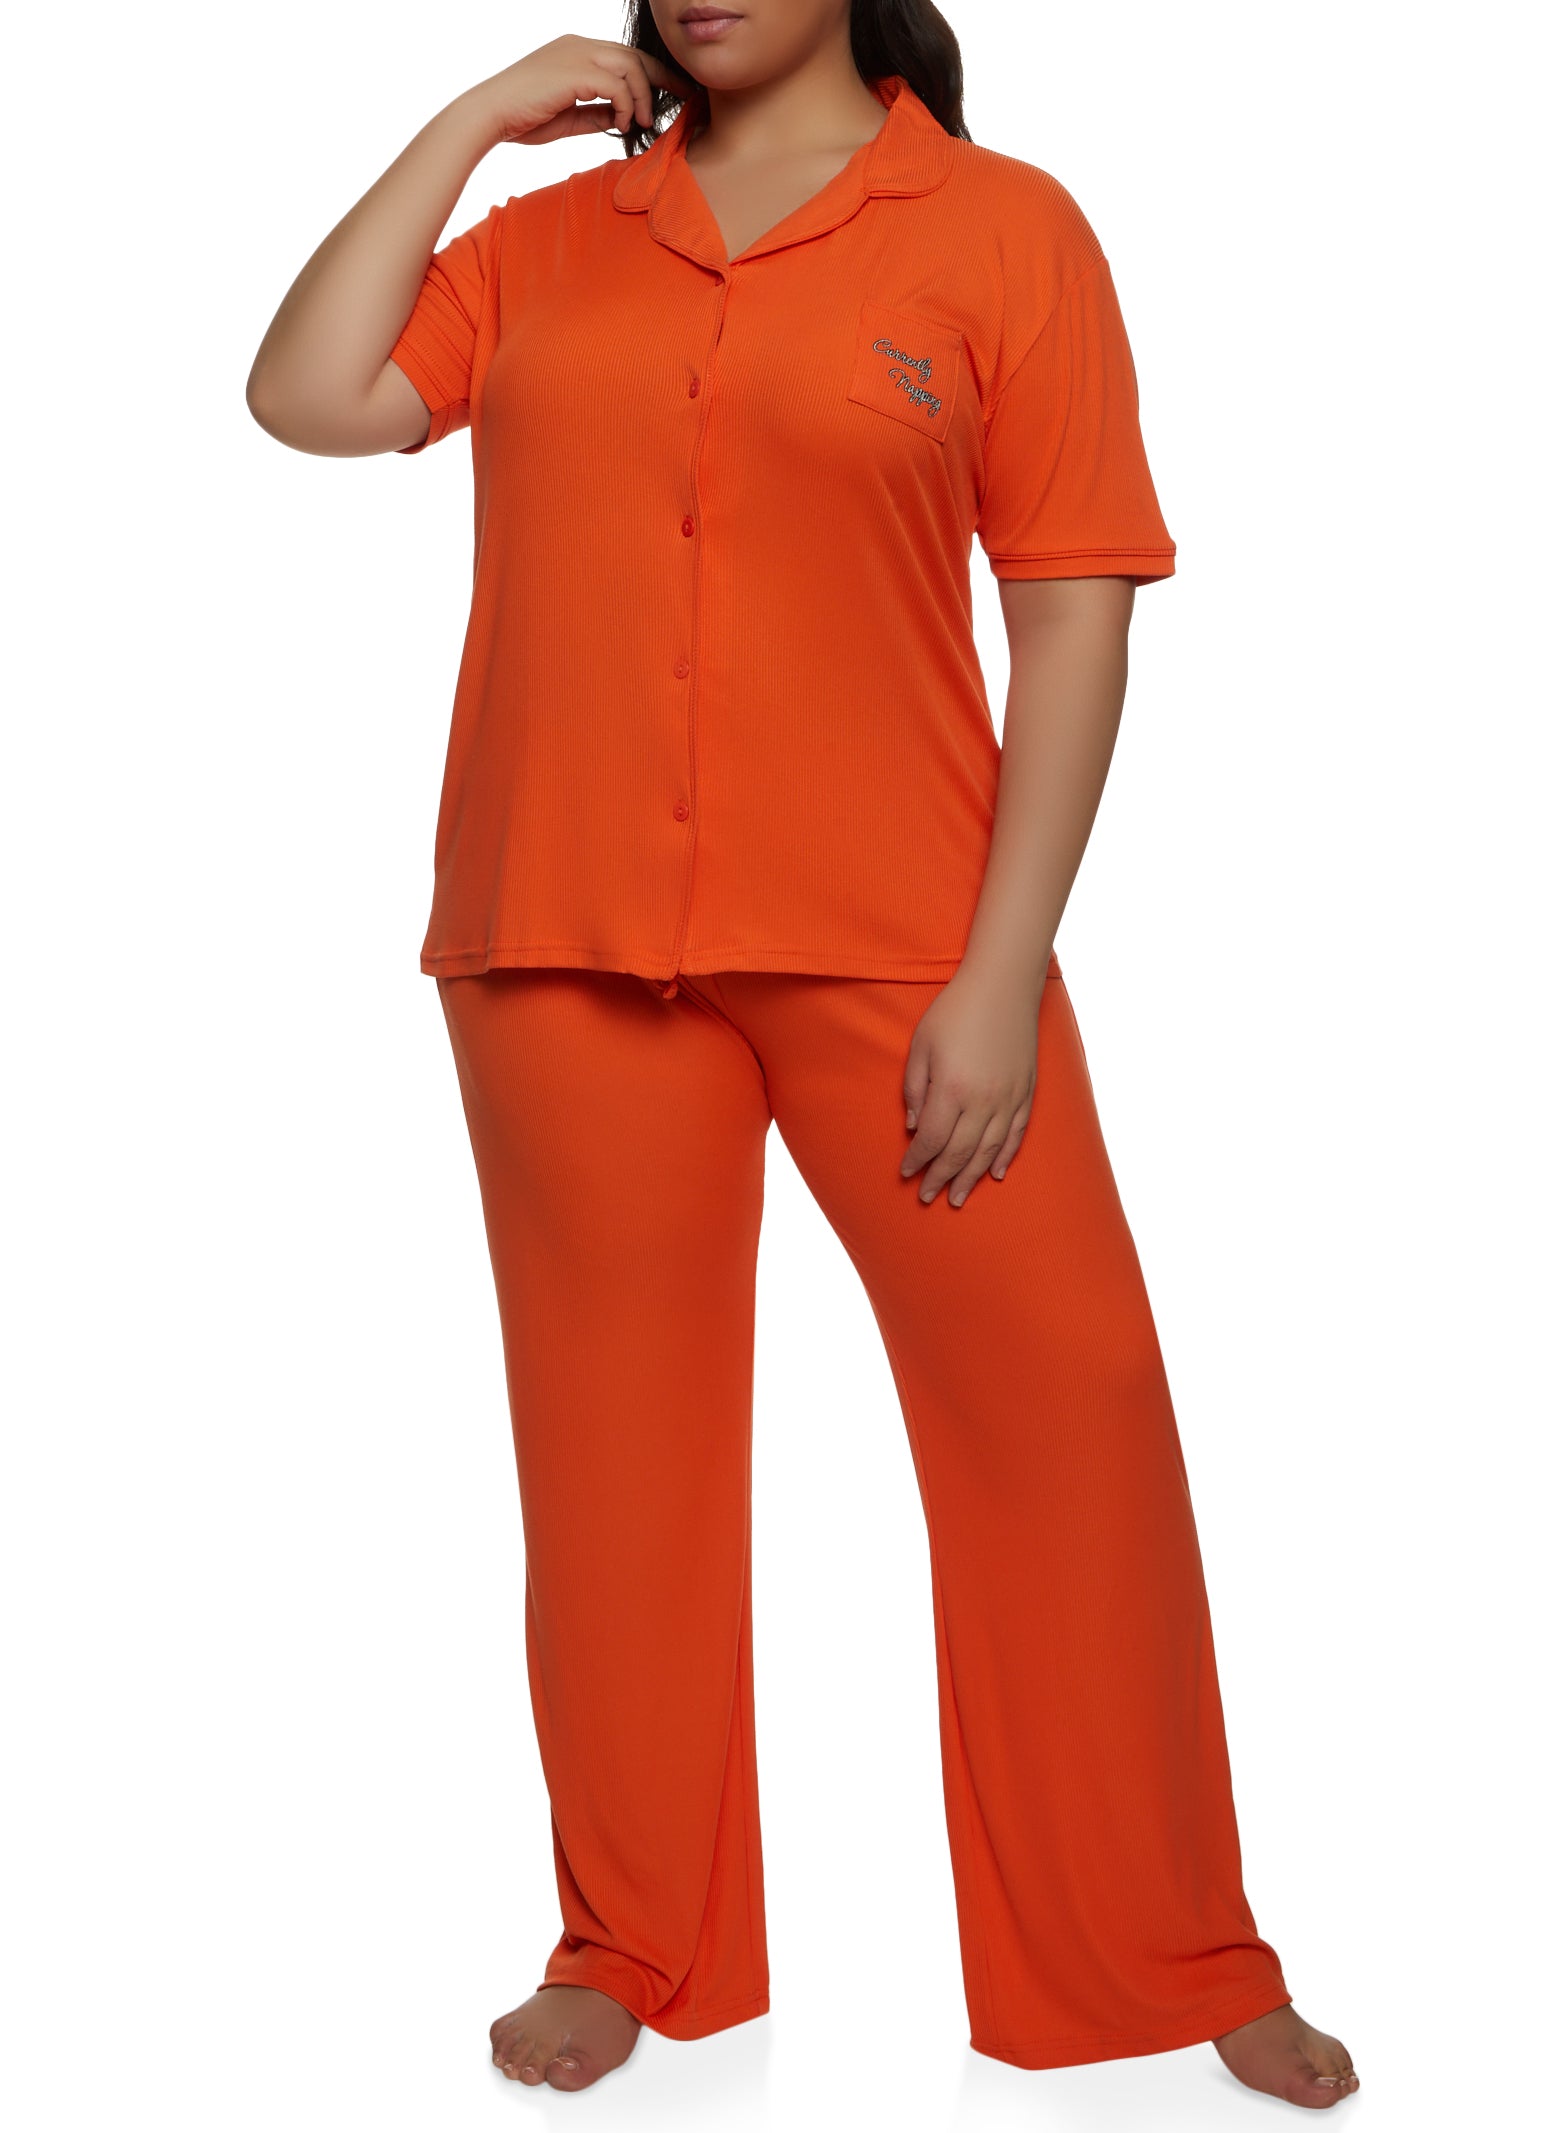 Plus Size Currently Napping Graphic Pocket Pajama Shirt and Pants